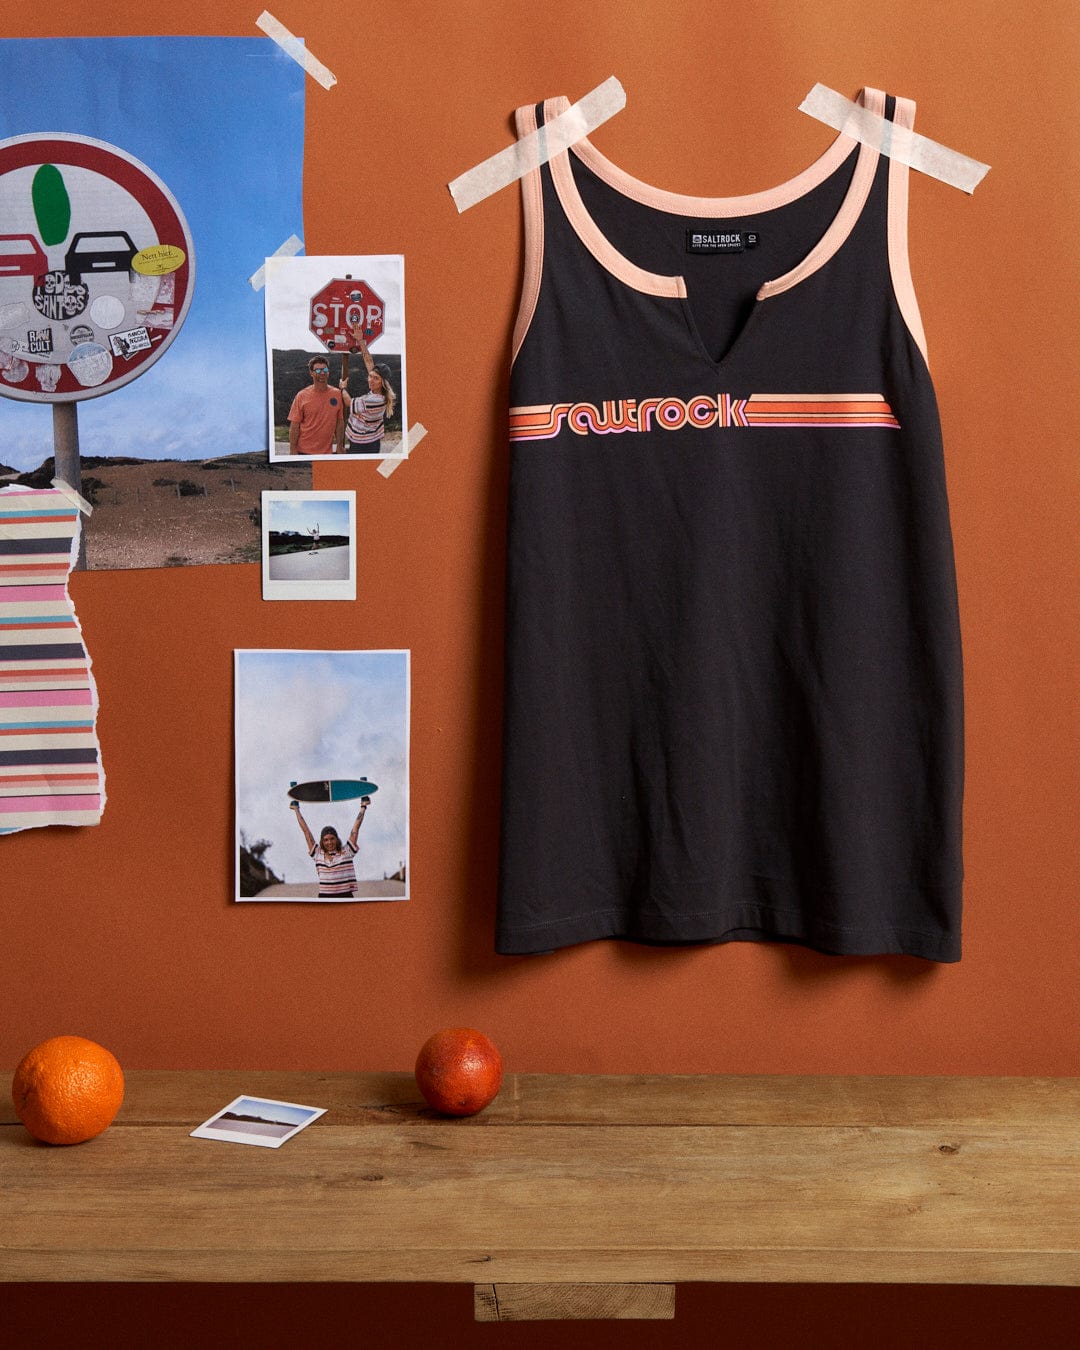 Dark grey tank top with "surfrock" logo and retro ribbon stripe, hanging on a wooden peg against an orange wall, decorated with various photographs and two oranges resting on a shelf below.